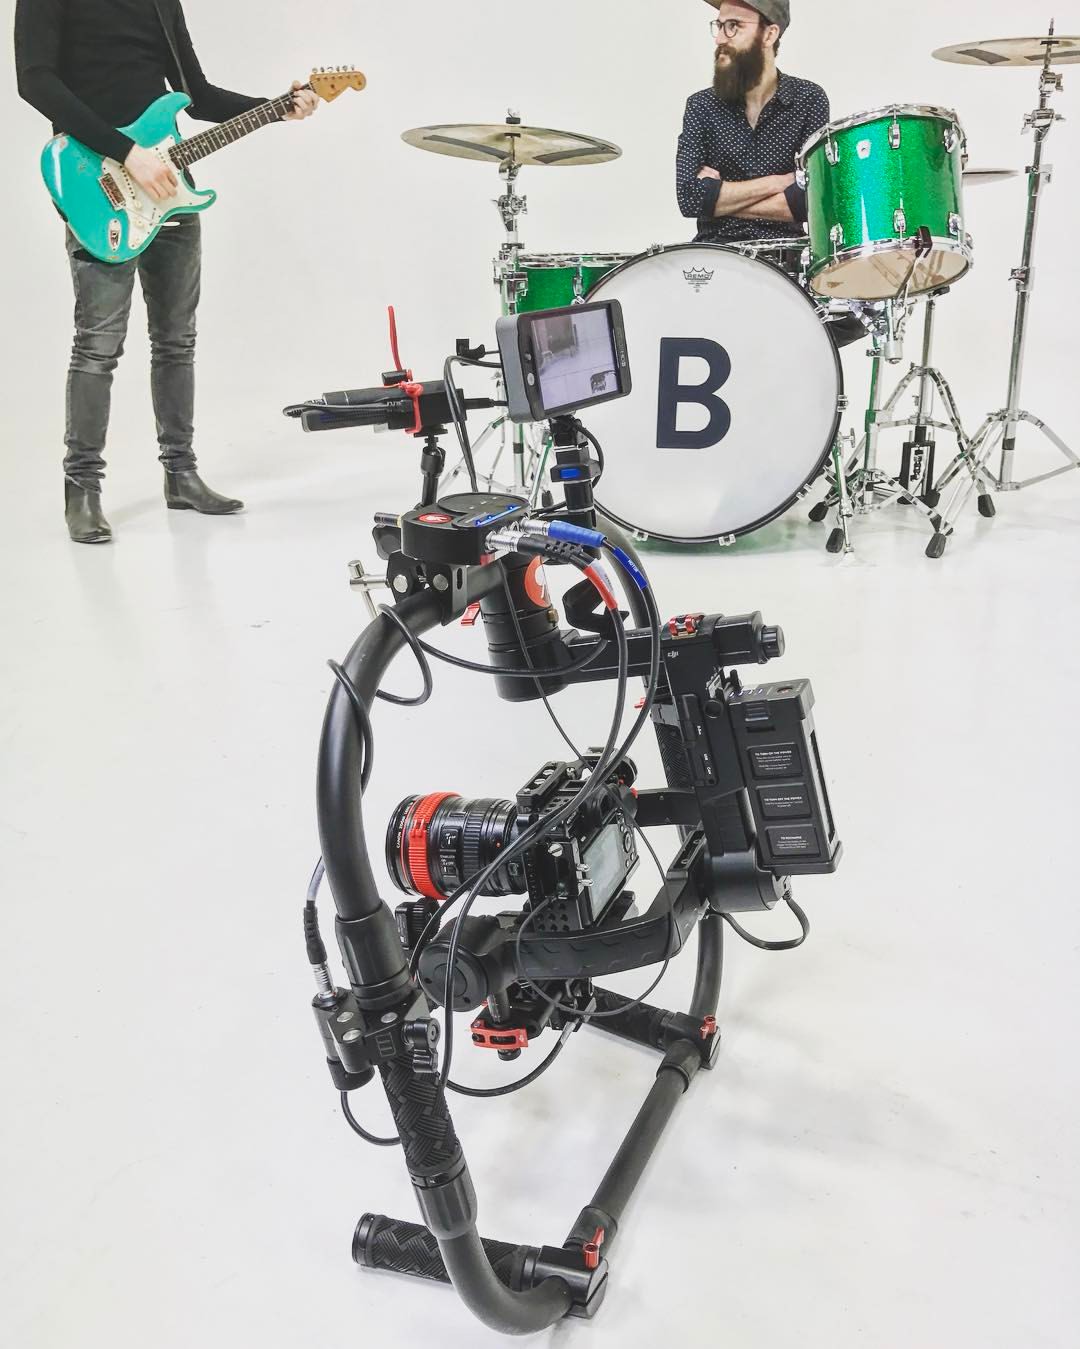 The ronin setup for last weeks music video shoot …